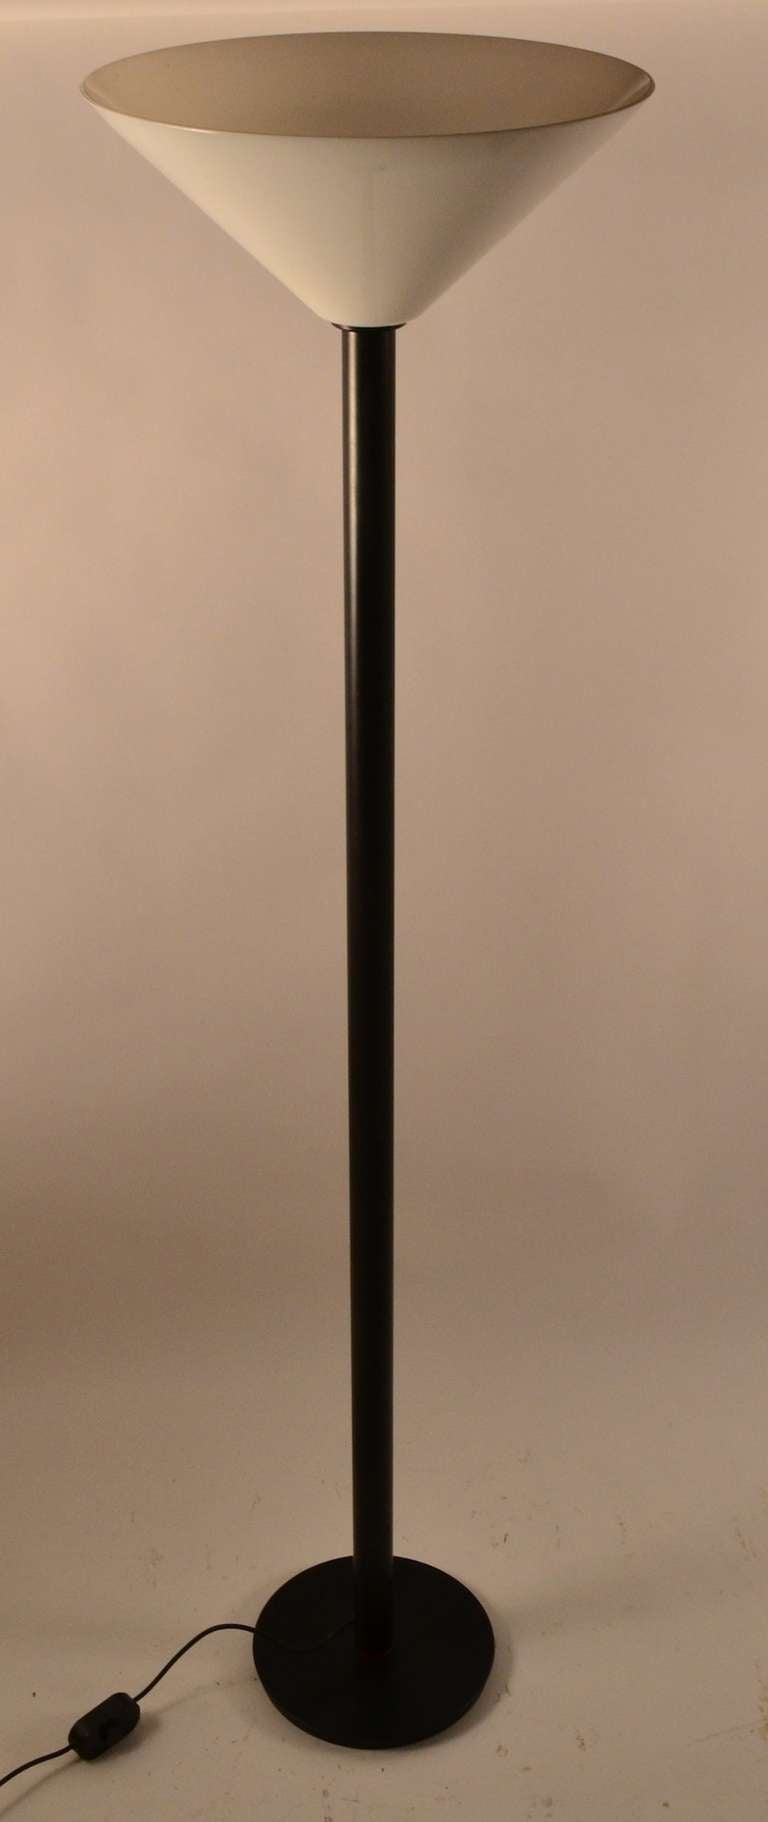 Elegant and simple Art Deco style uplight floor lamp. The on/off switch is on the cord, consistent with the style of the period (1970/1980's) Probably manufactured in Italy for Robert Sonneman.